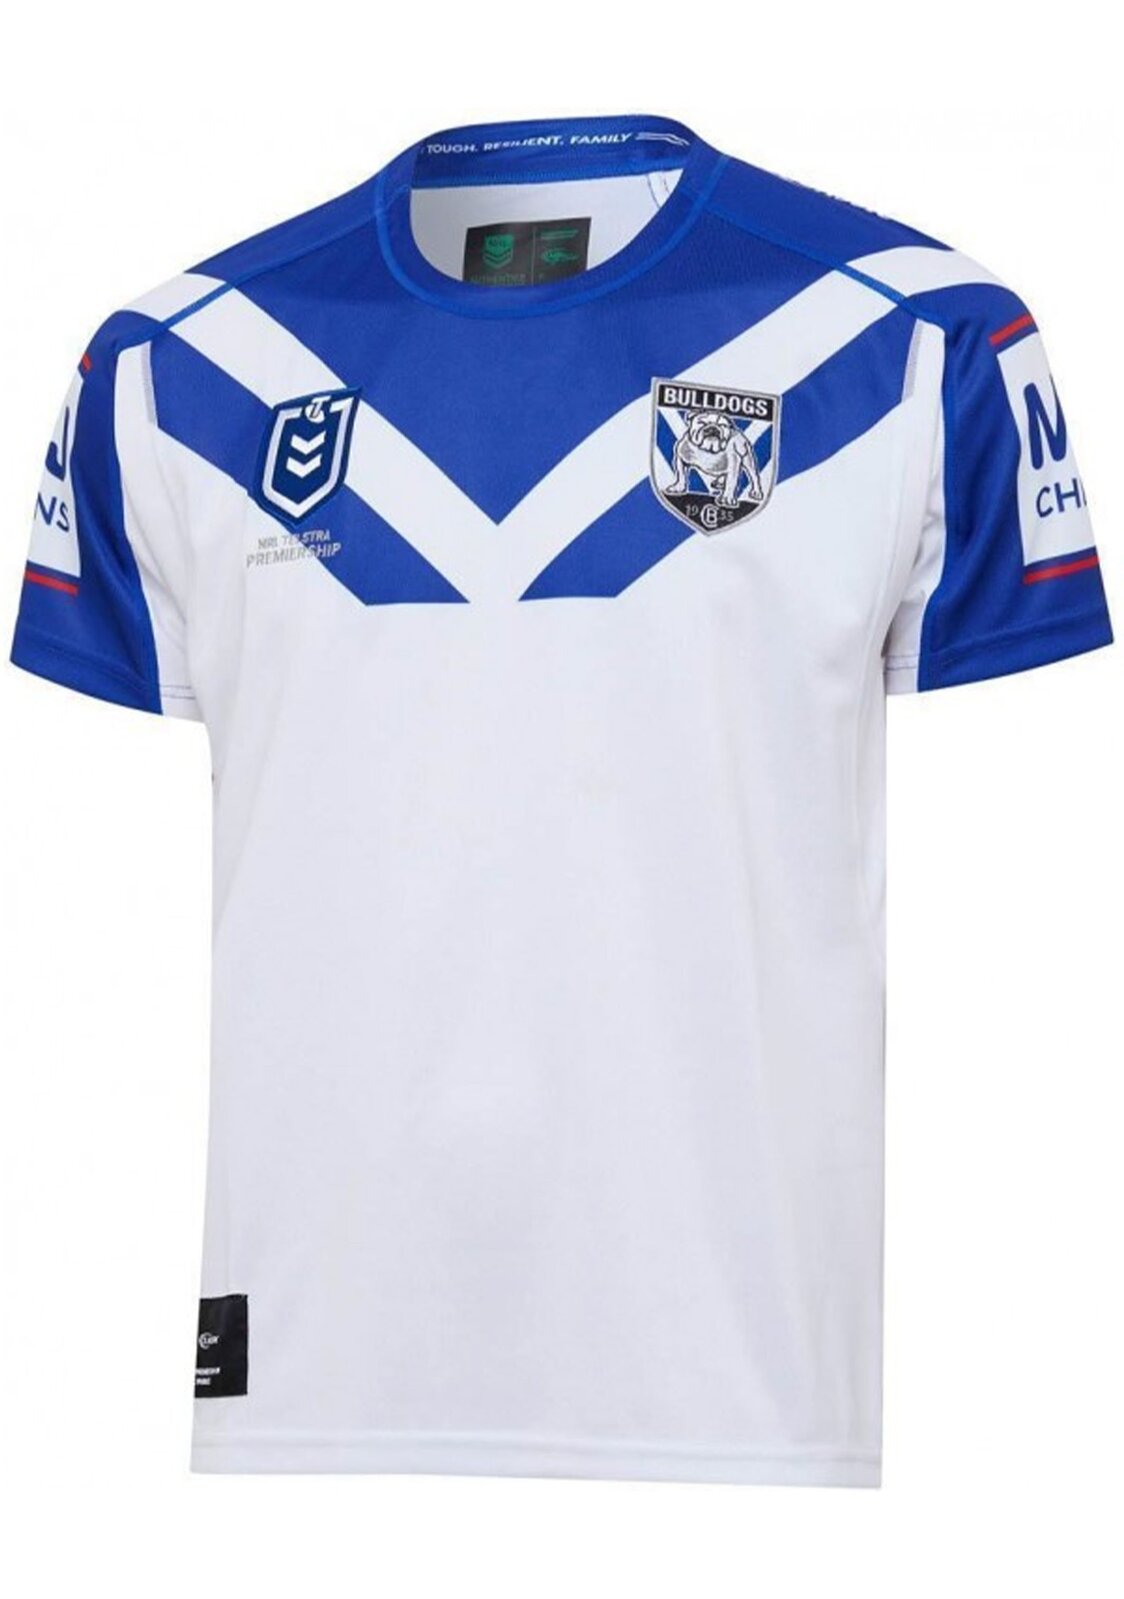 Details about   Canterbury Bulldogs Ladies Home Jersey 'Select Size' 10-20 BNWT5 